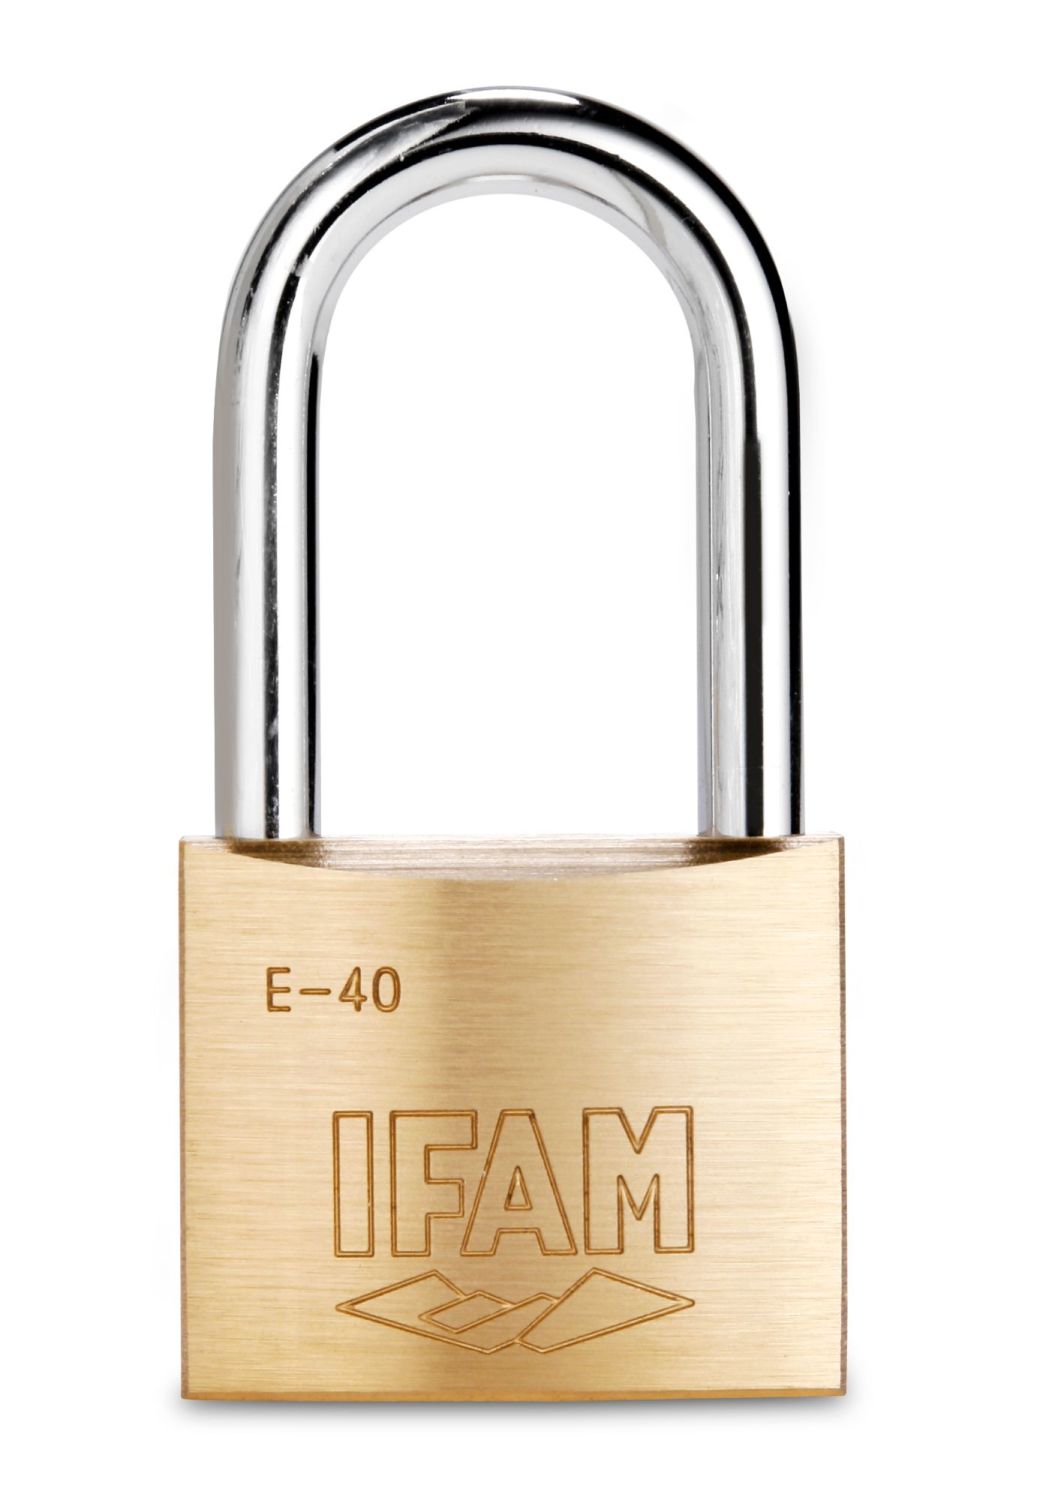 IFAM E50 LARGER SIZE BRASS PADLOCK. 50mm BODY . LONG STEEL SHACKLE. USE WIT